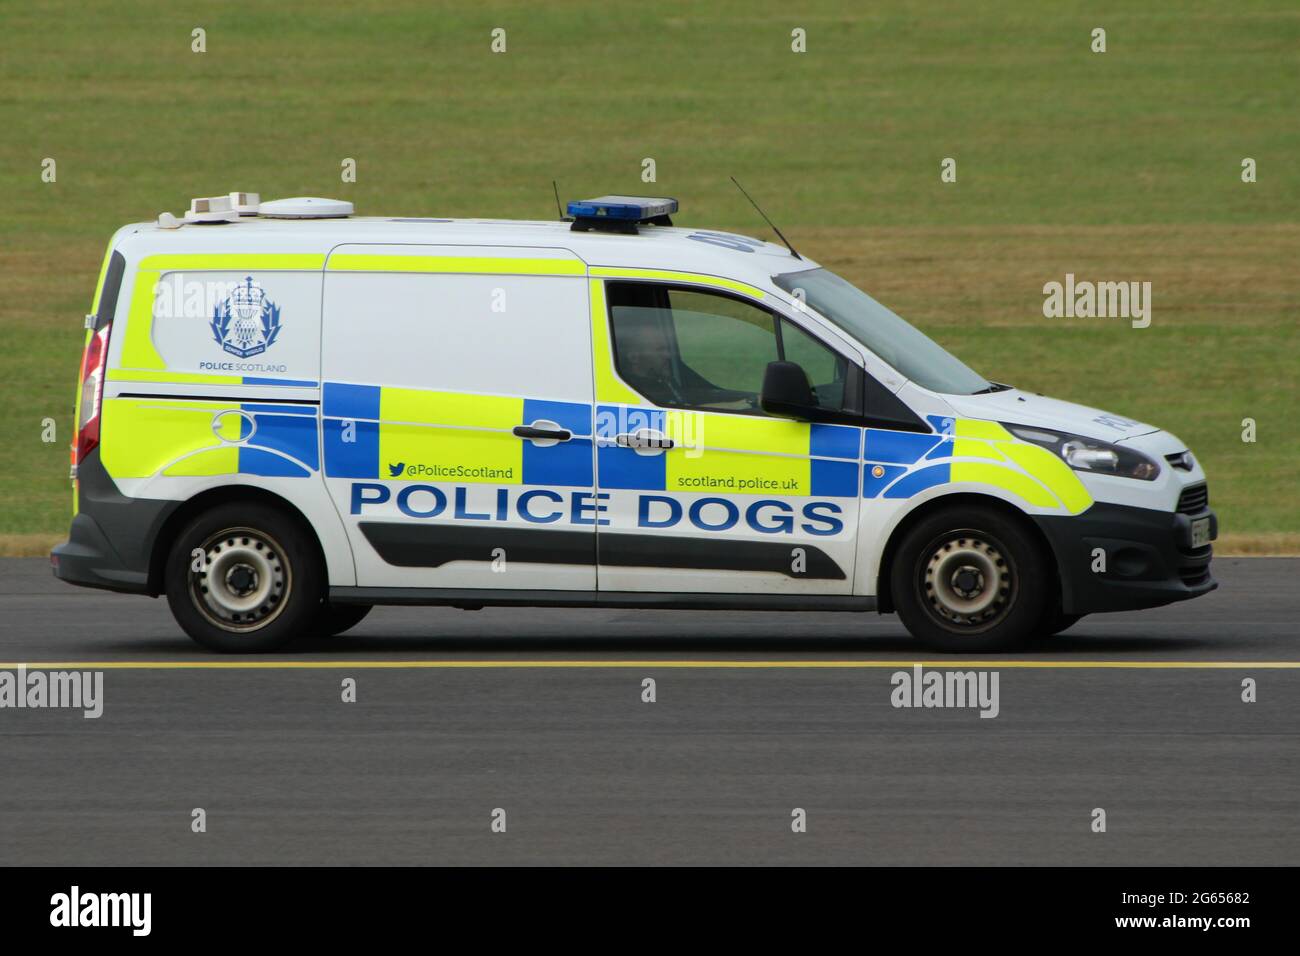 Ford Transit Police Van High Resolution Stock Photography and Images - Alamy